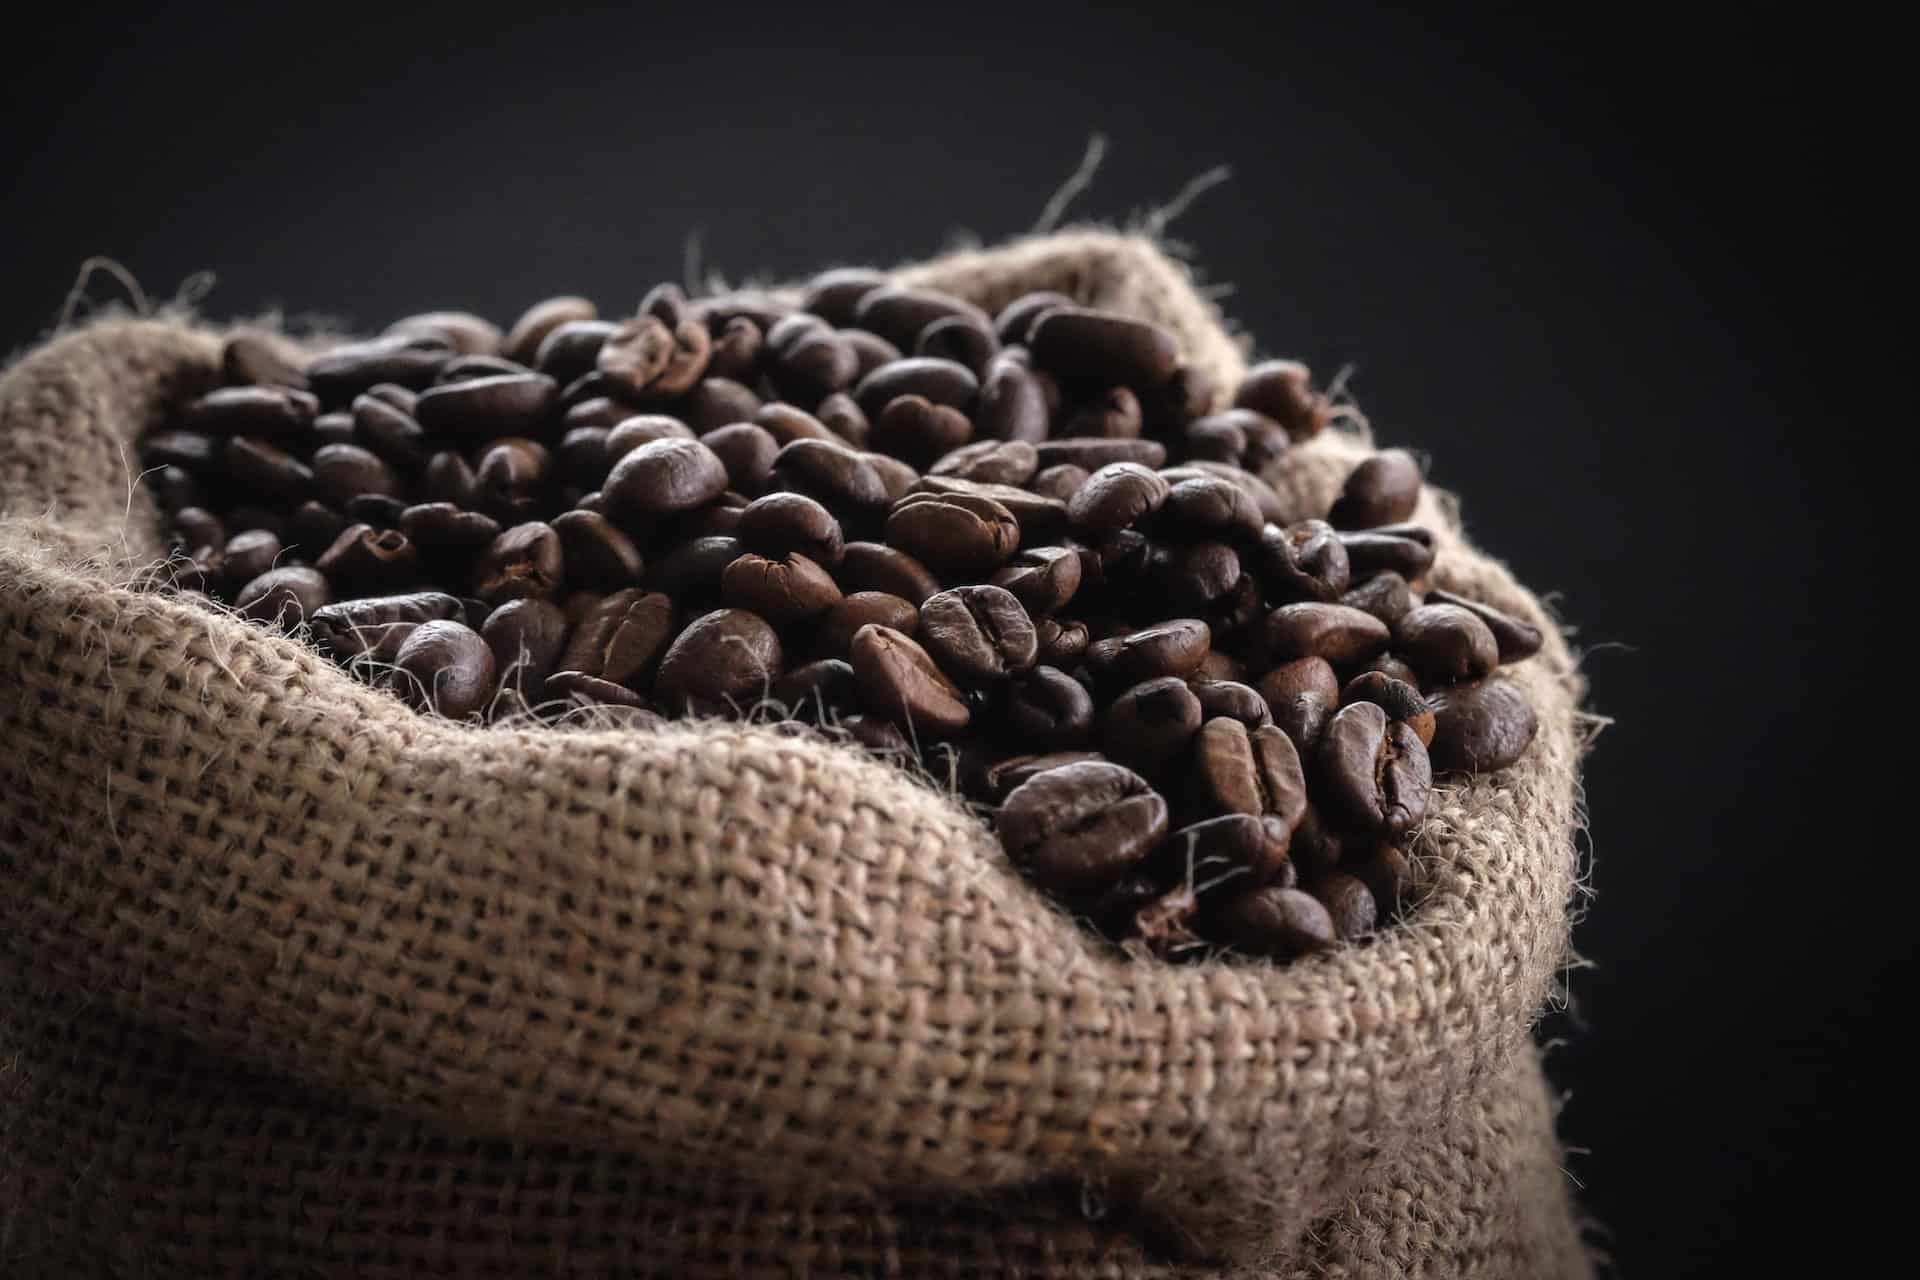 Freshly roasted coffee – why invest in it?